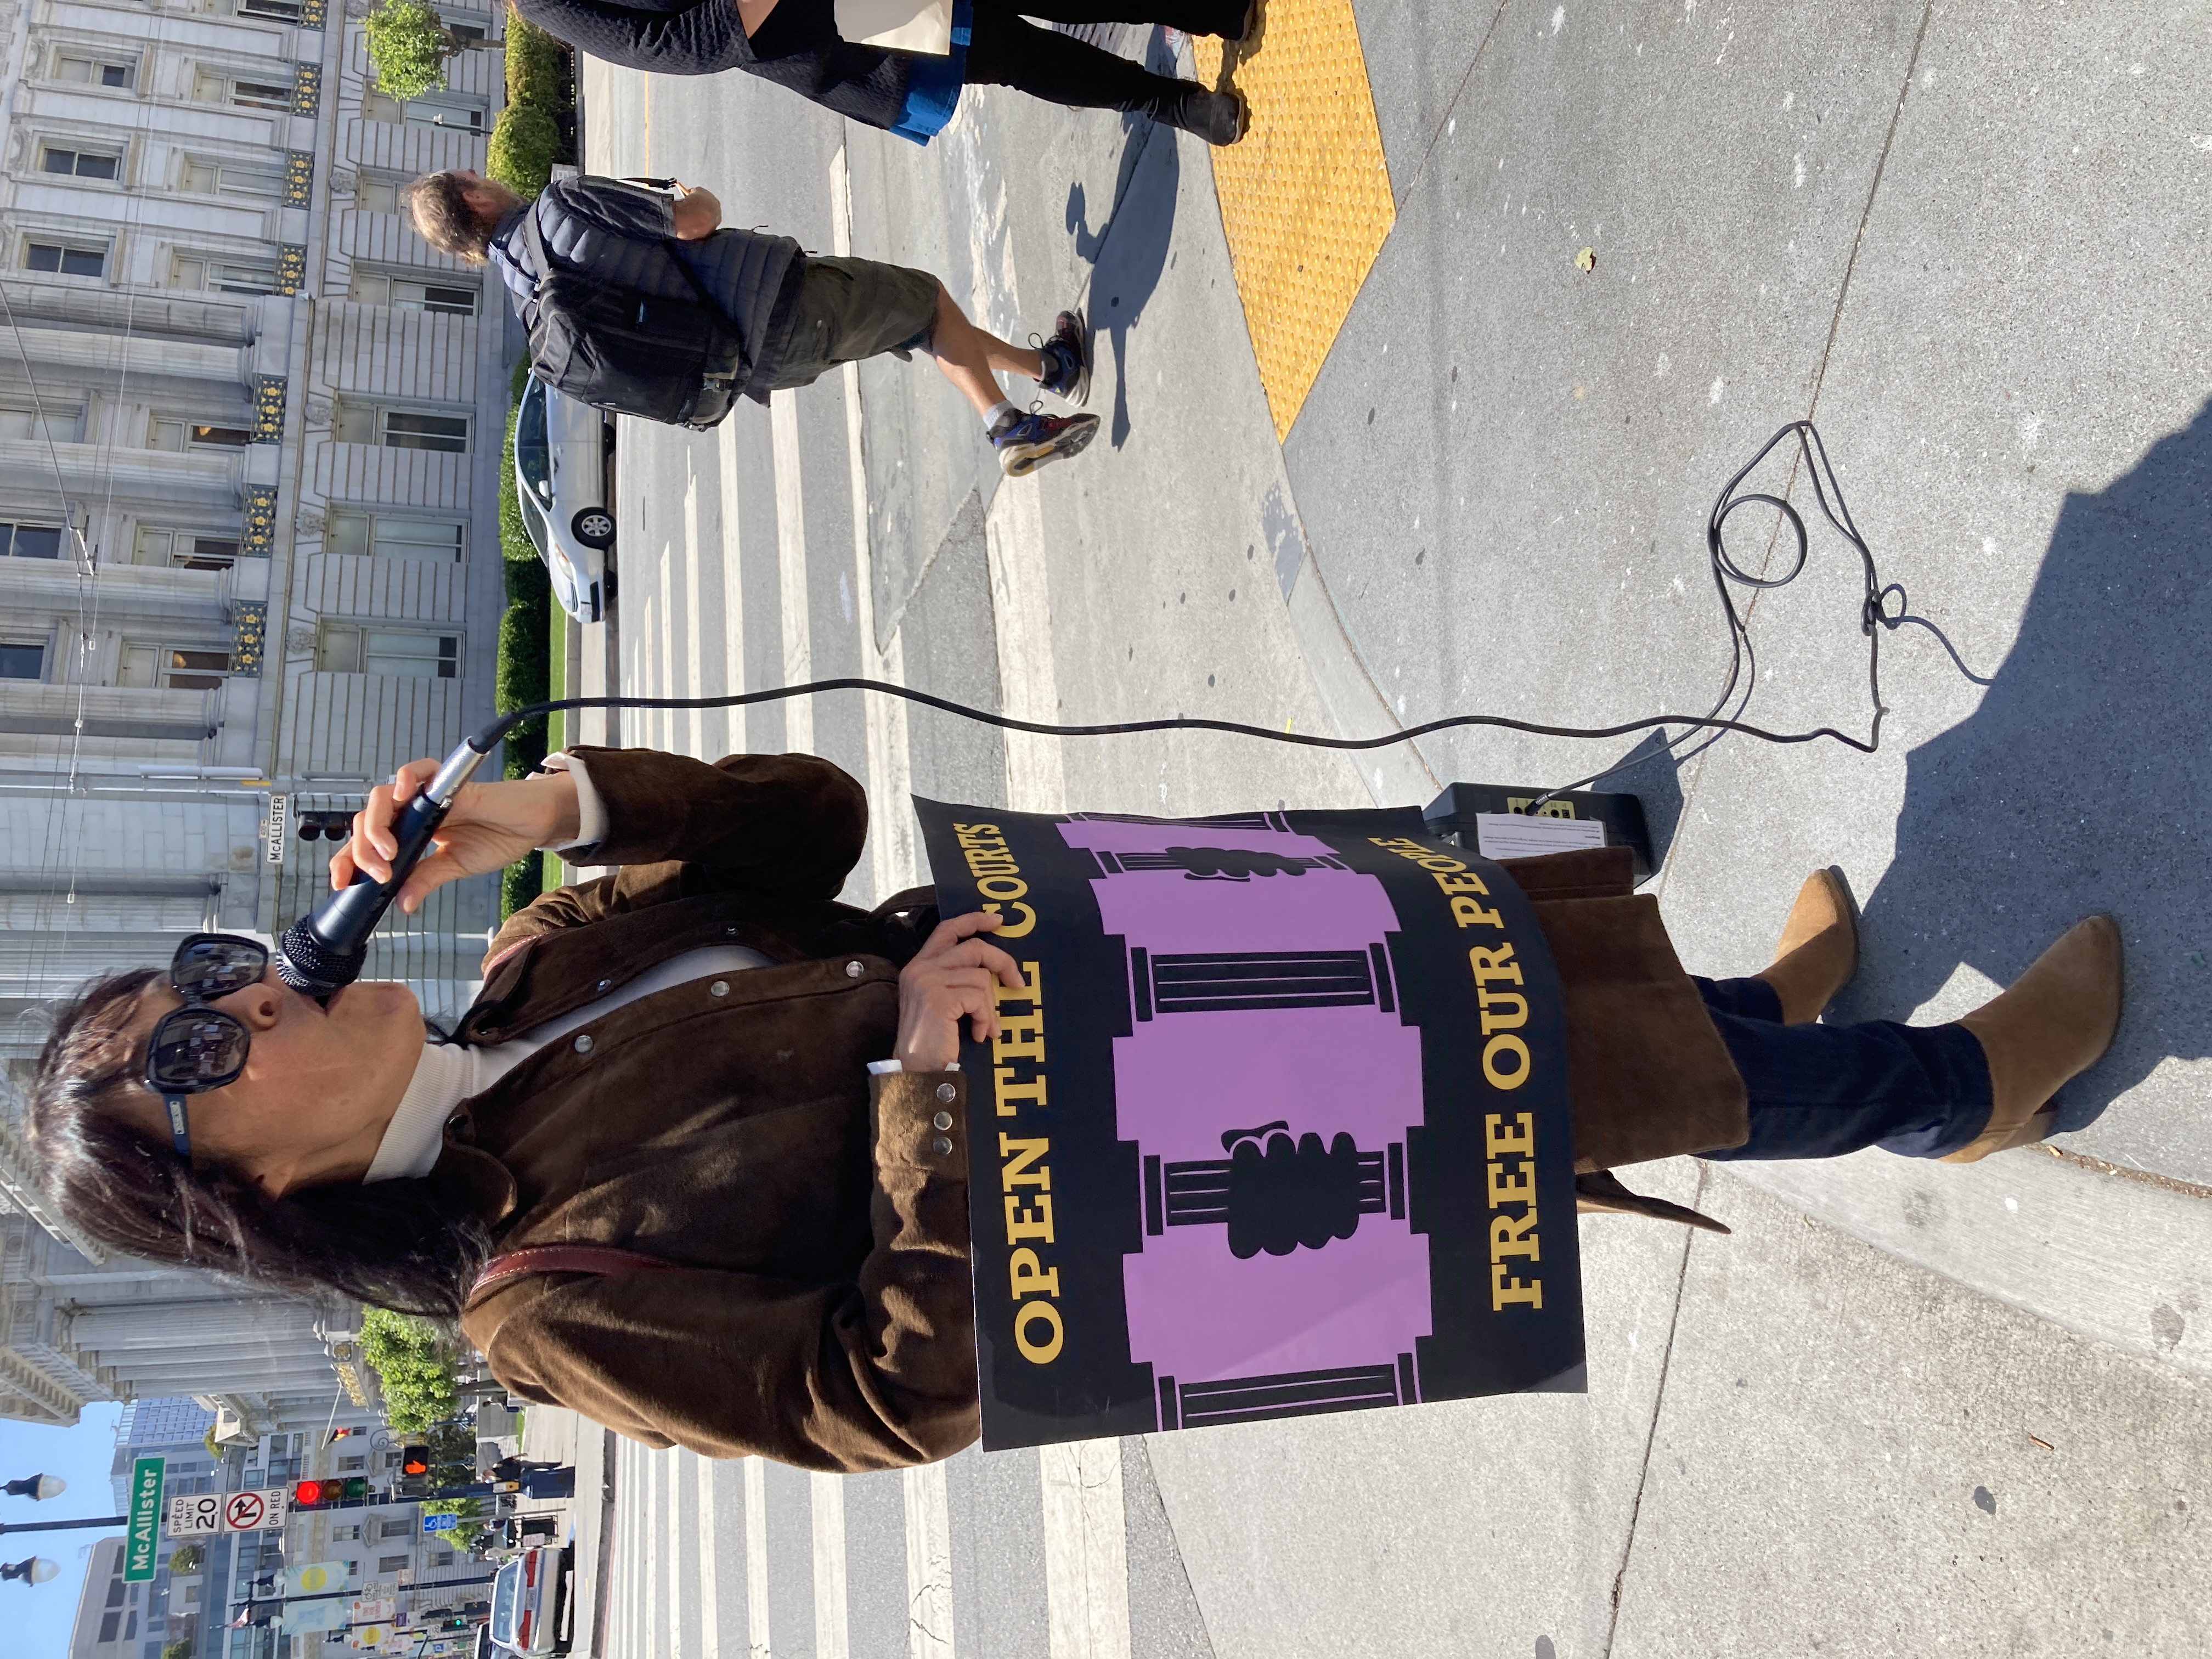 A woman wearing large sunglasses and a long brown coat stands on a street corner and speaks into a microphone while holding a sign that reads "open the courts, free our people."